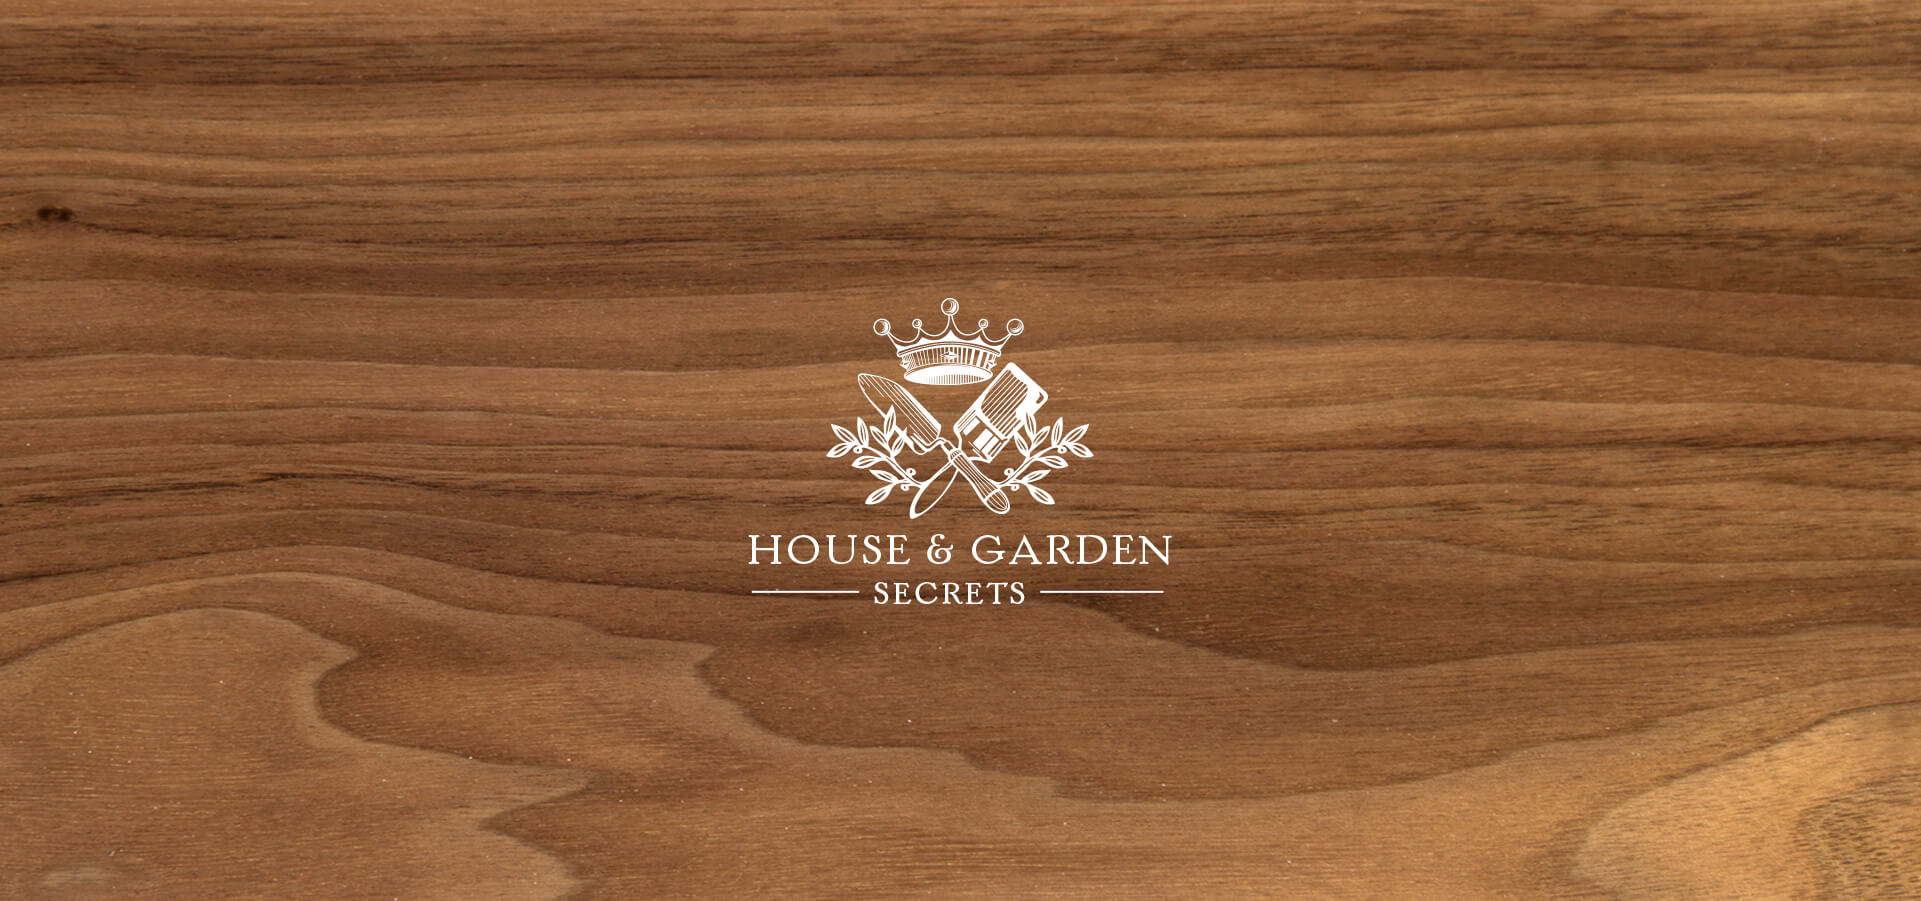 House and garden service company logo design and identity